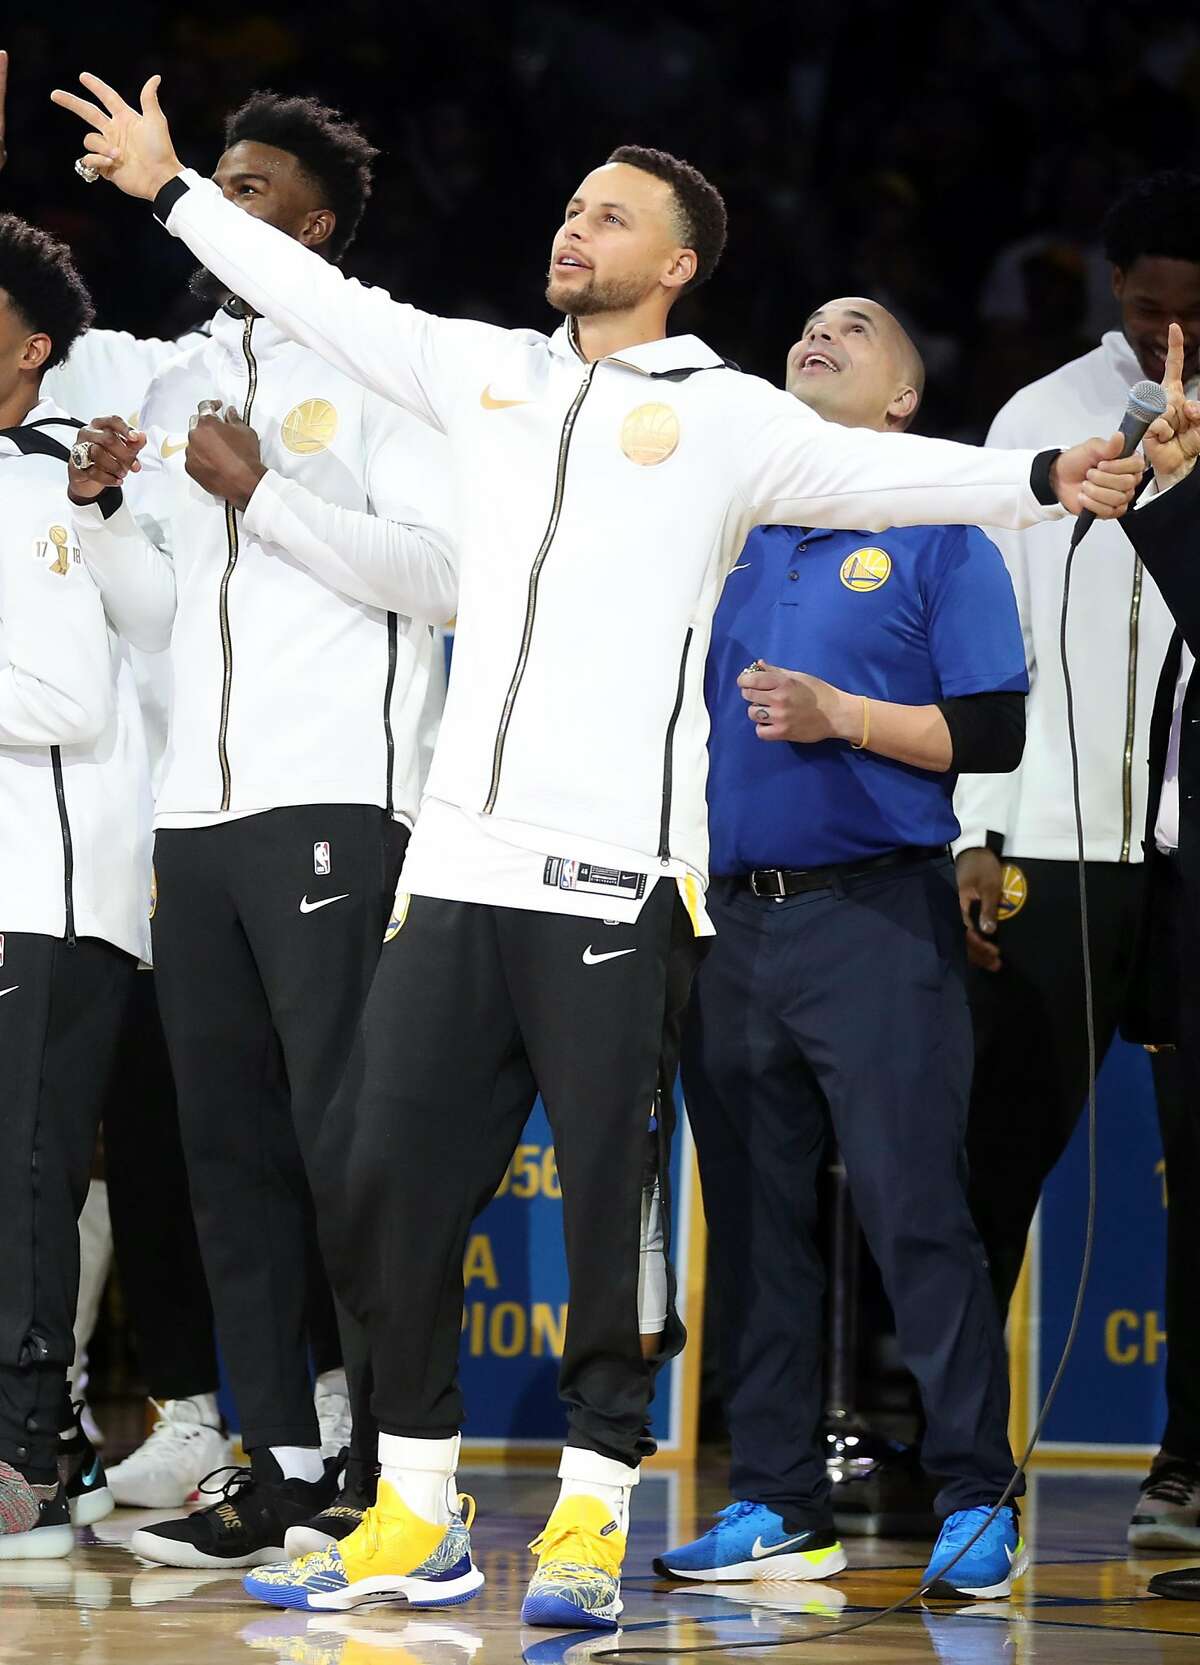 Golden State Warriors' Stephen Curry and equipment manager Eric Housen watch as 2018 NBA Championship banner is unveiled during ceremony before Opening Night game against Oklahoma City Thunder at Oracle Arena in Oakland, Calif. on Tuesday, October 16, 2018.